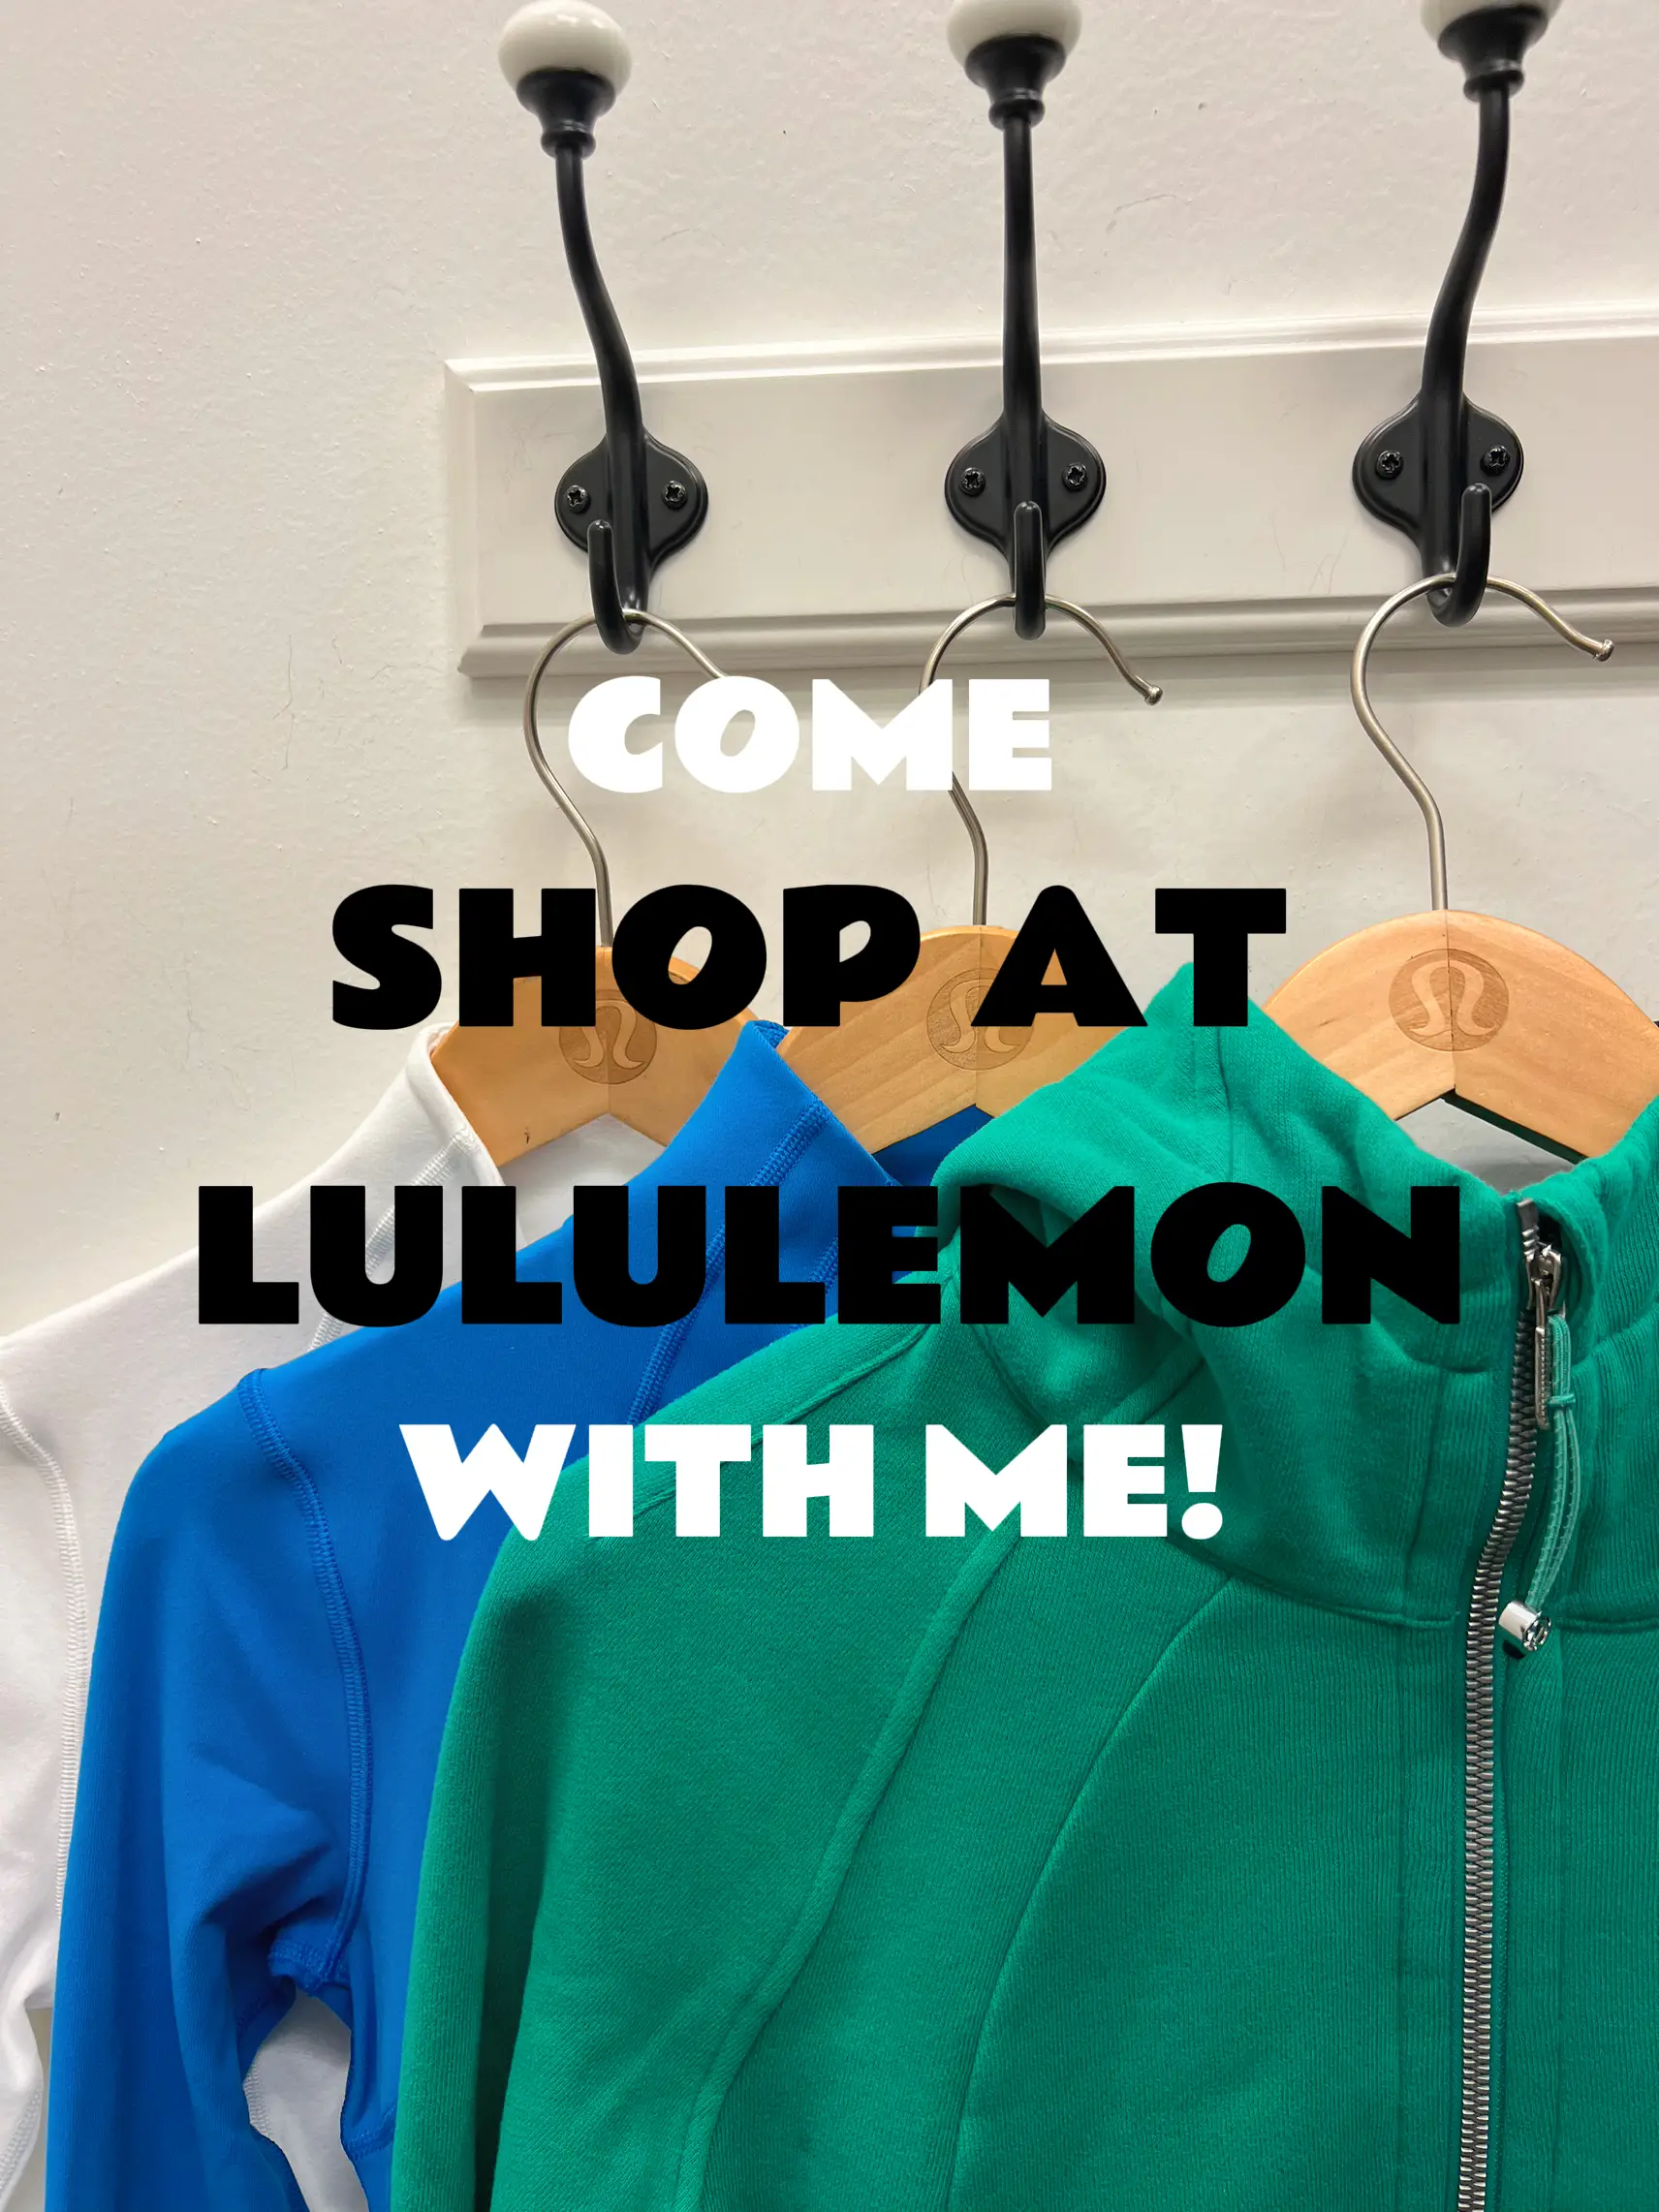 New arrivals from @lululemon 🫶 Drop by the store to try them on